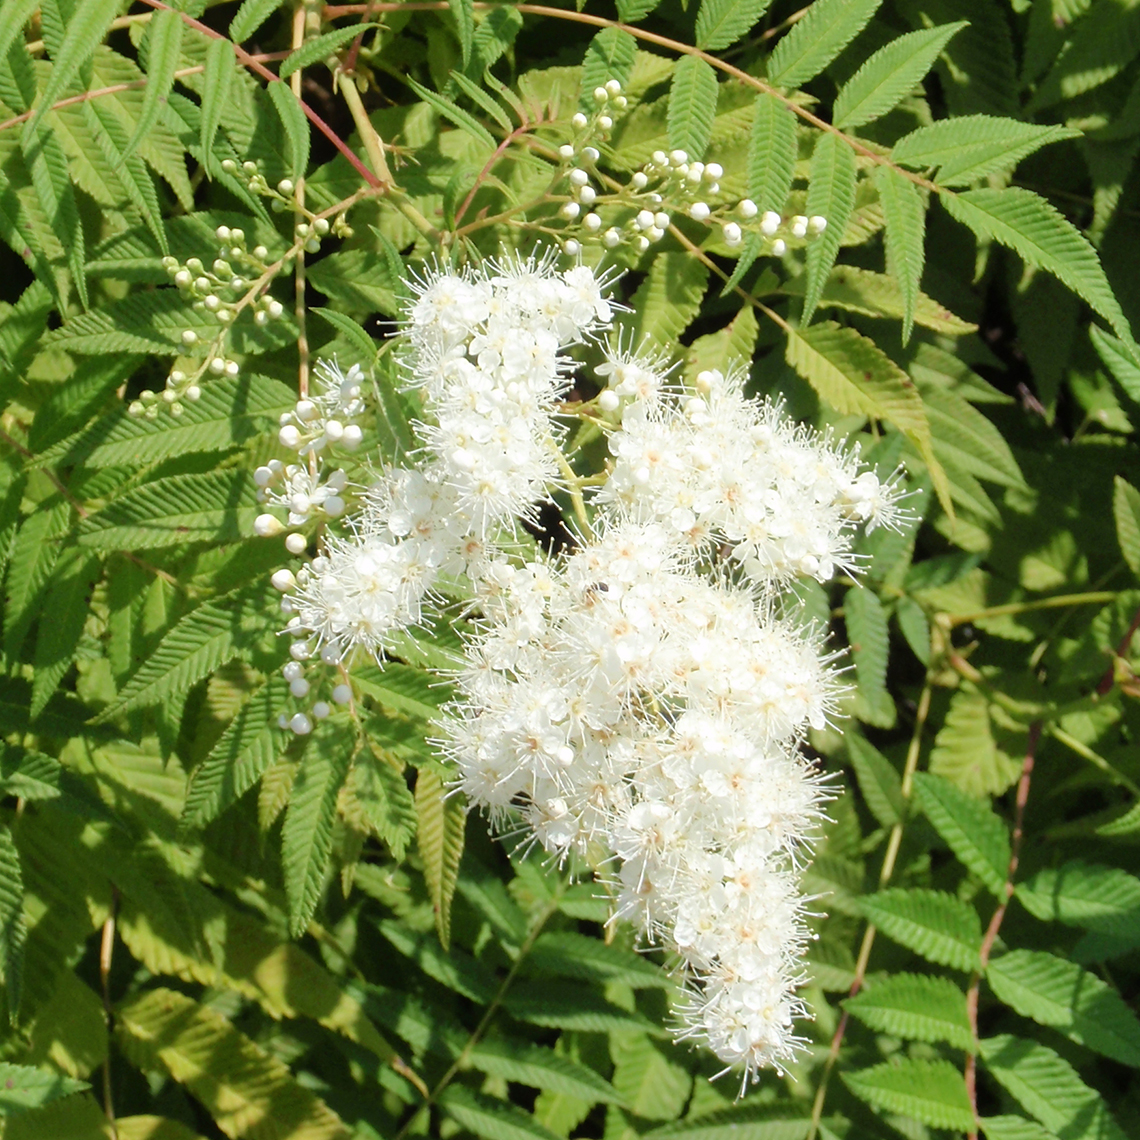 Lacy white panical Sorbaria flower over green foliage